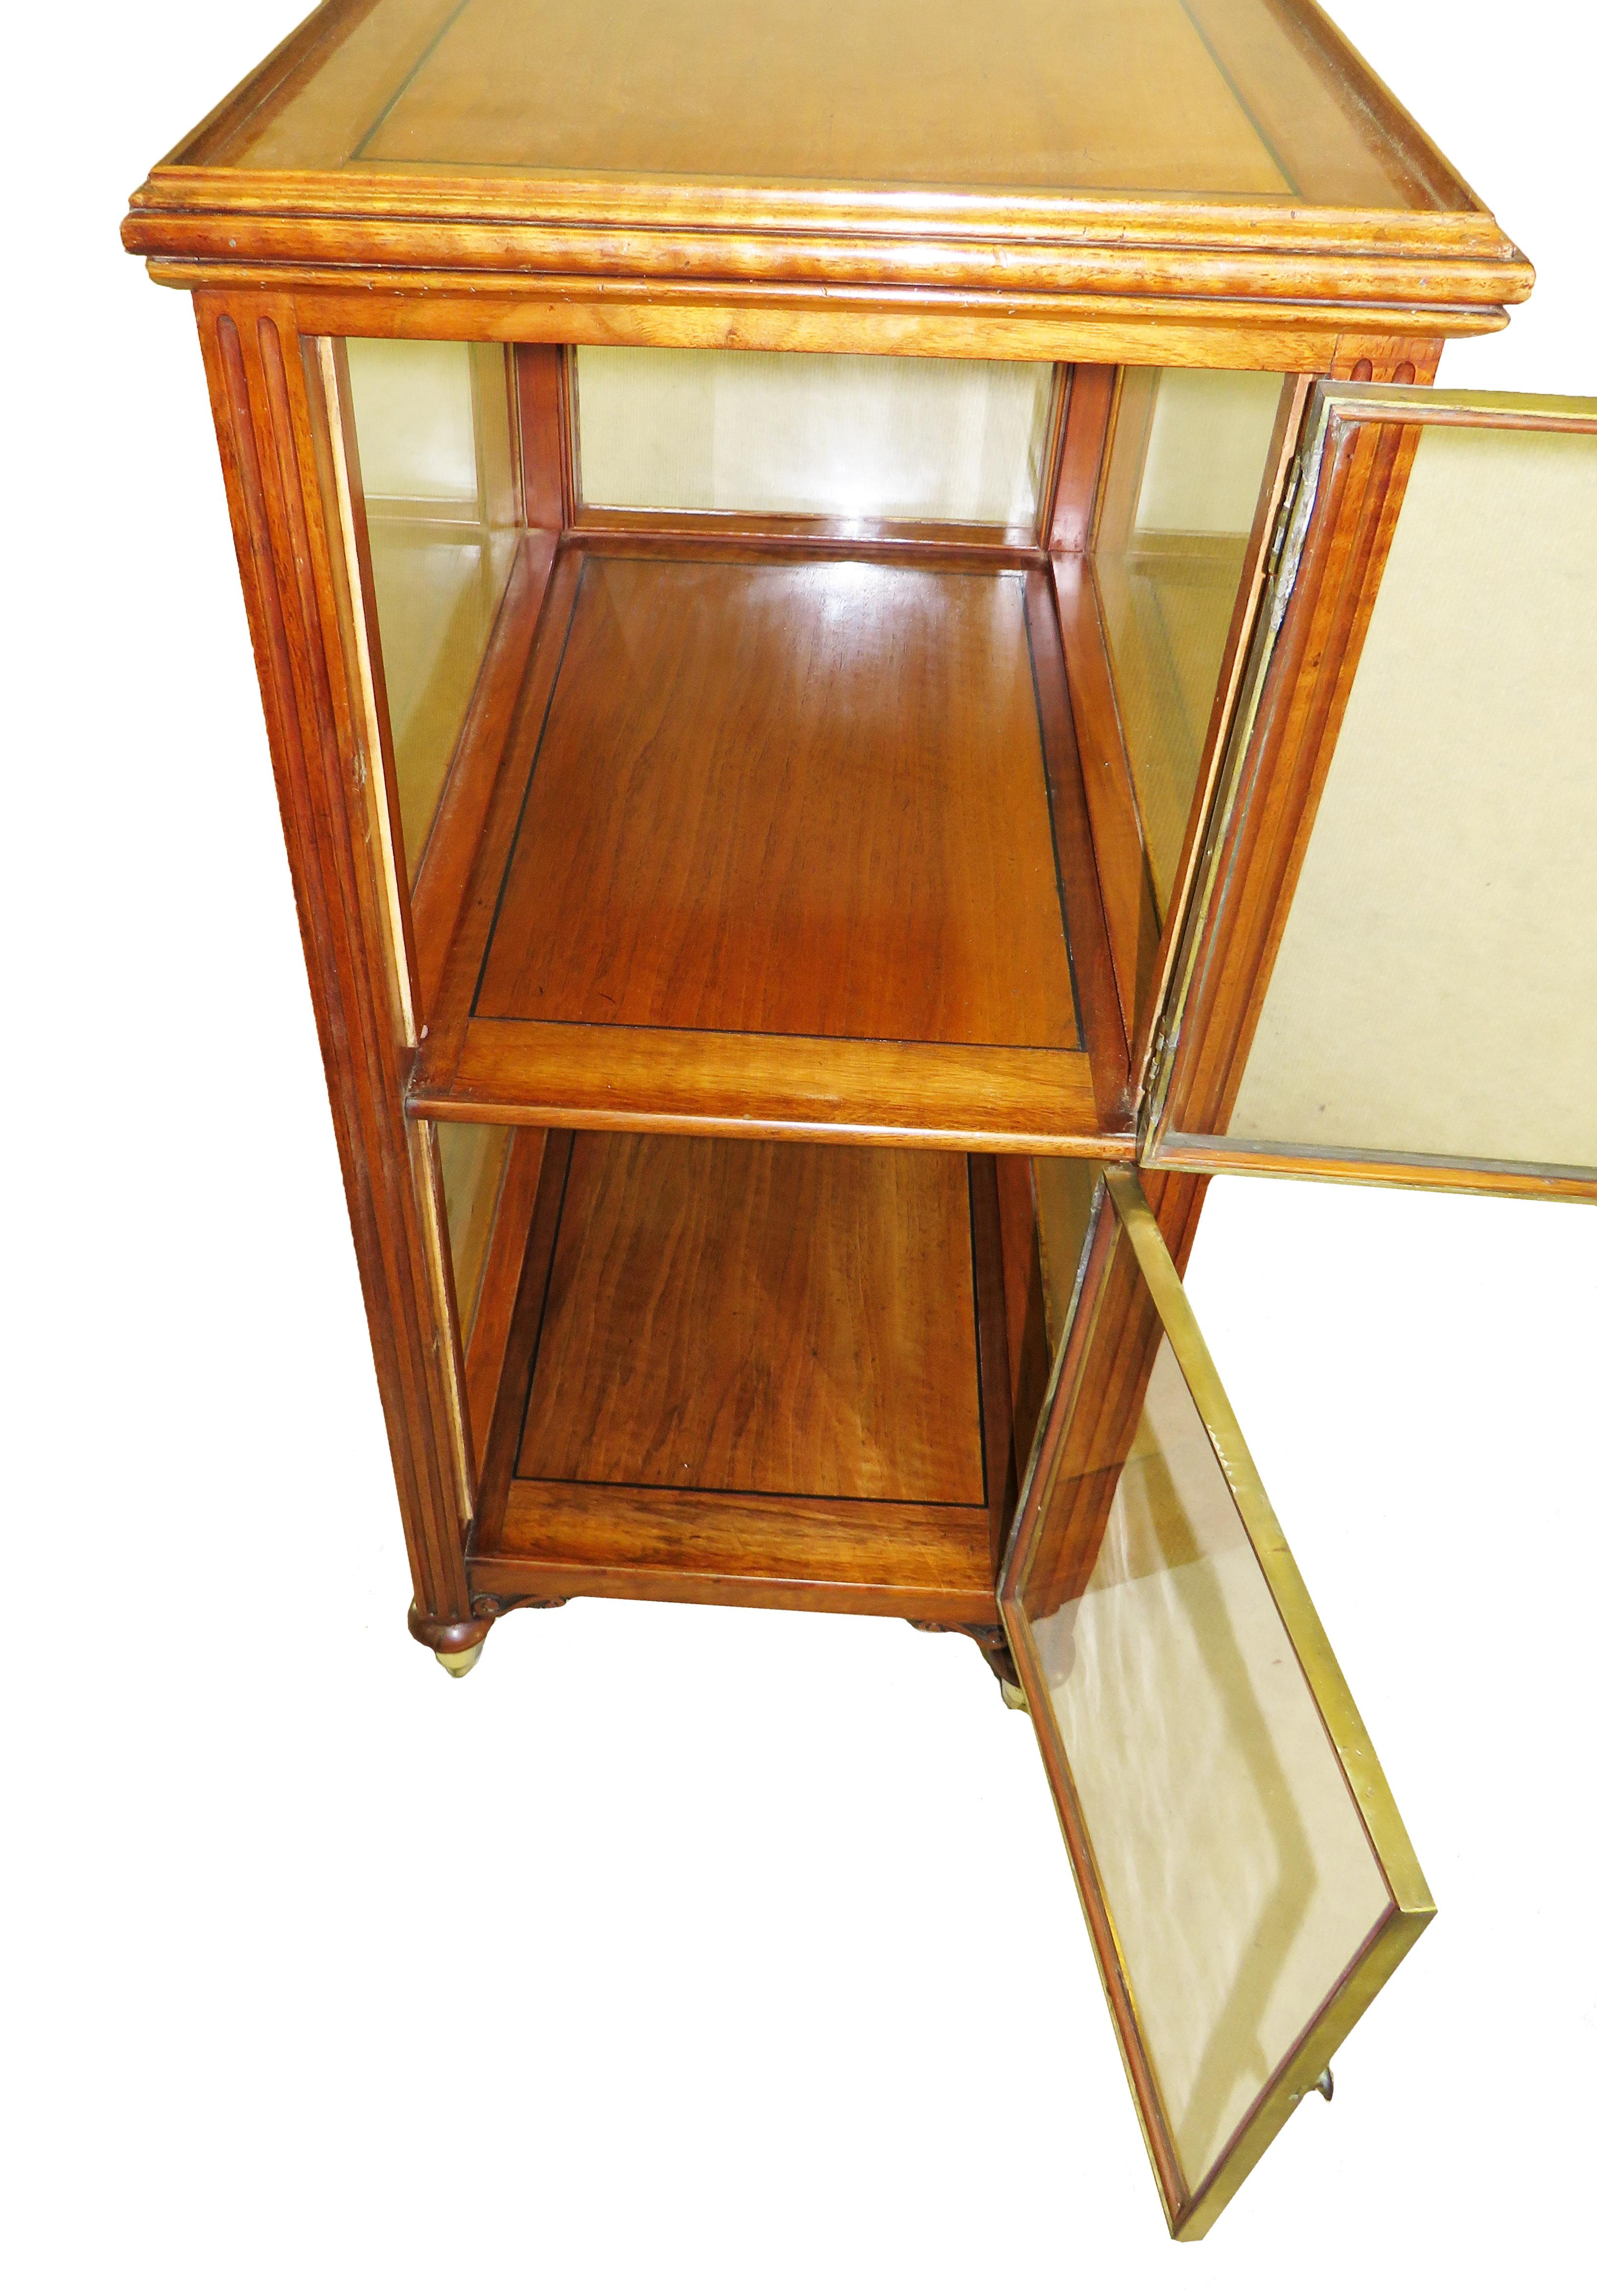 A very good quality mid-19th century French walnut
central standing bijouterie display cabinet having two end doors
and brass moulded decoration raised on elegant turned
feet with original brass castors

(A good quality and attractive cabinet